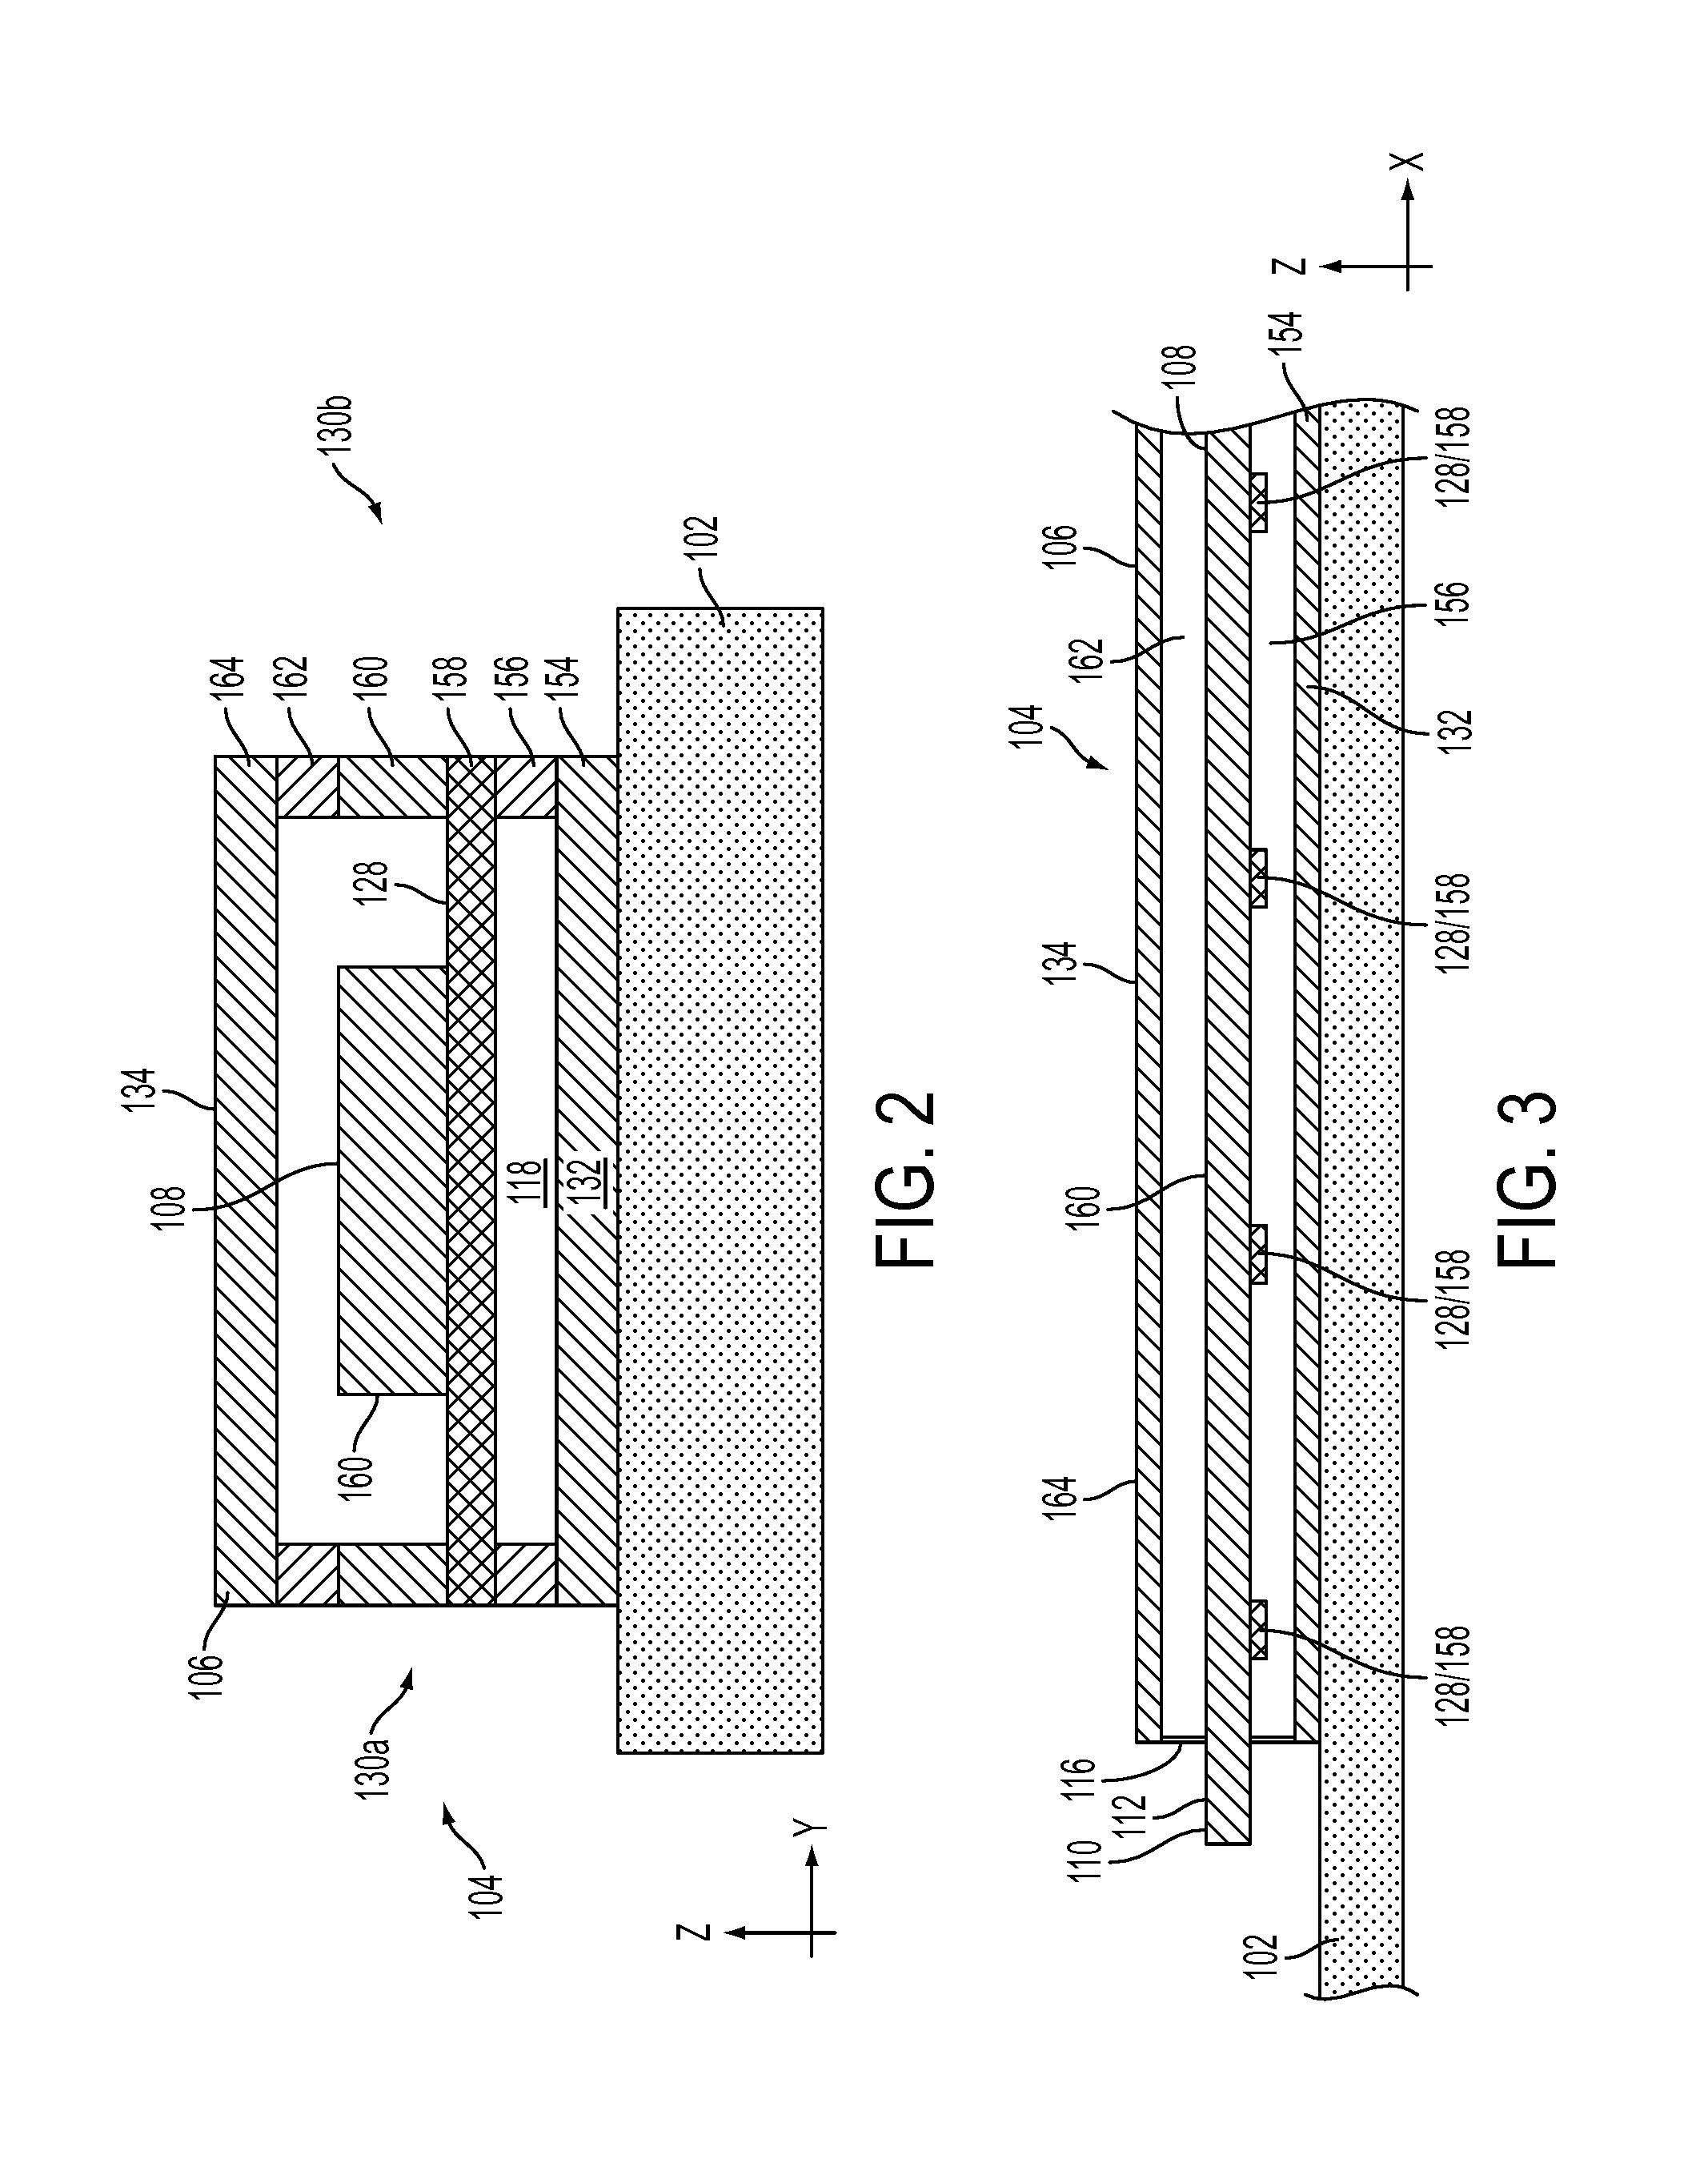 Wafer-level RF transmission and radiation devices